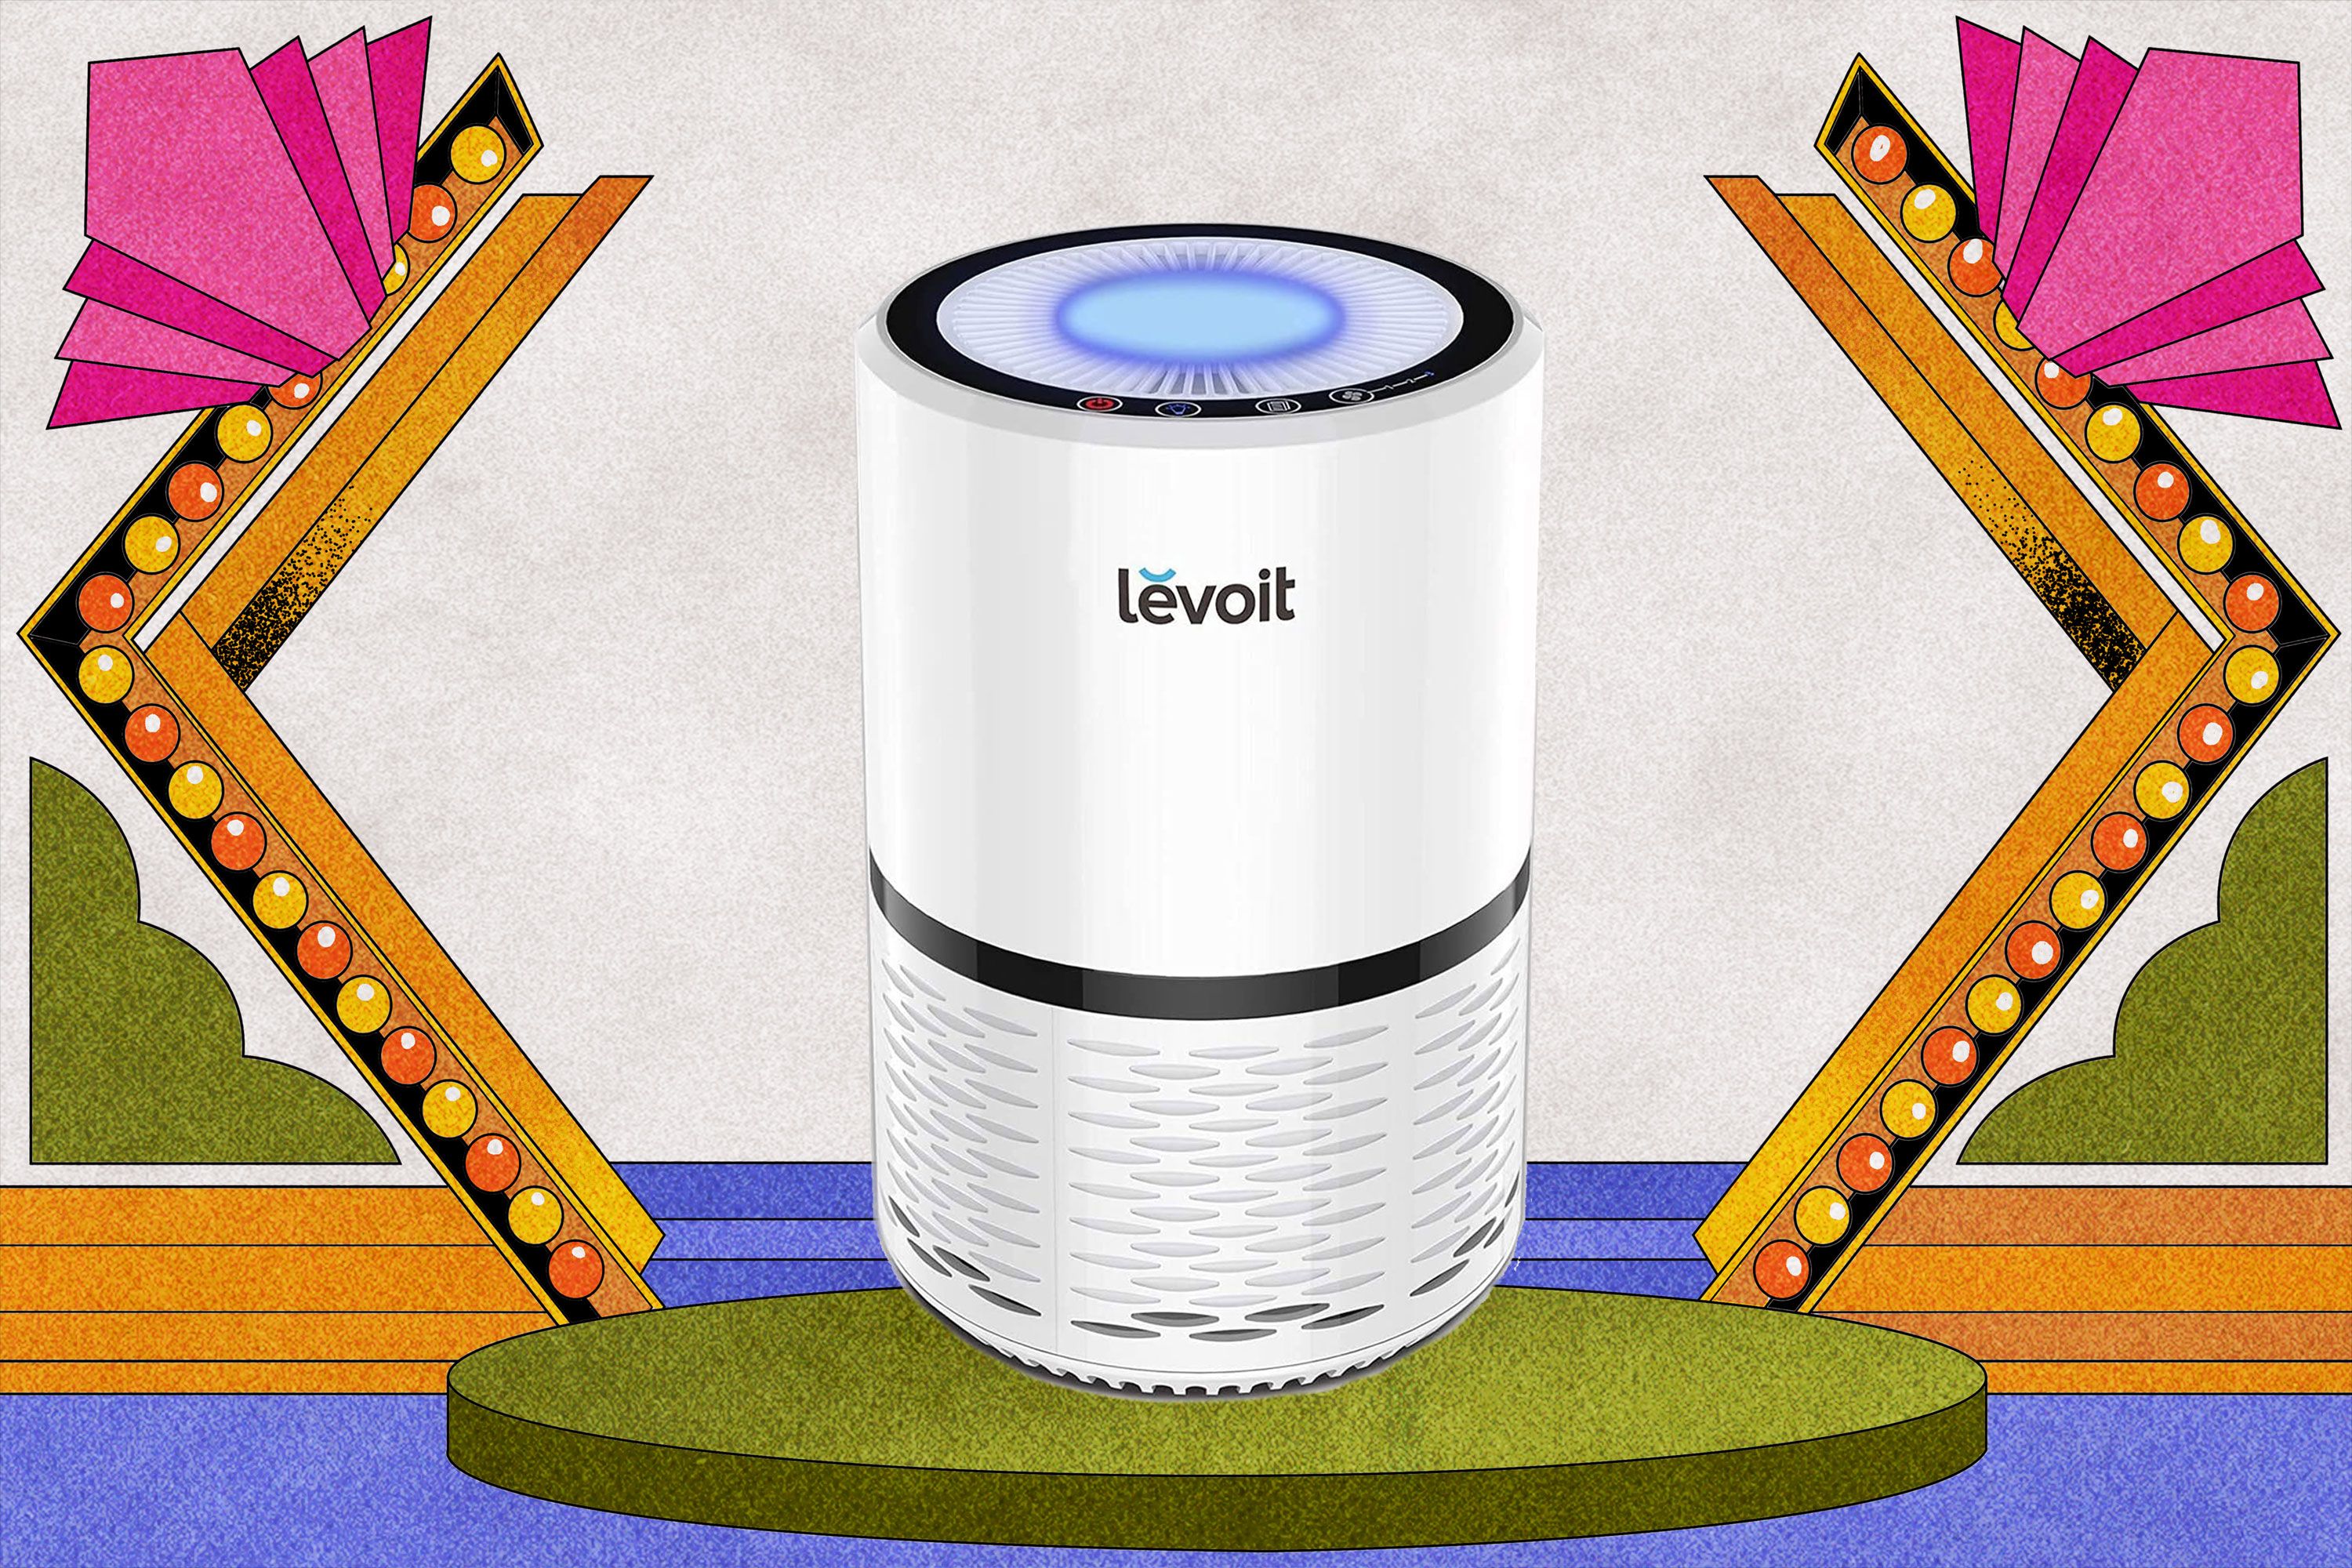 Levoit LV-H132 Air Purifier Prime Day Early Access Sale 2022